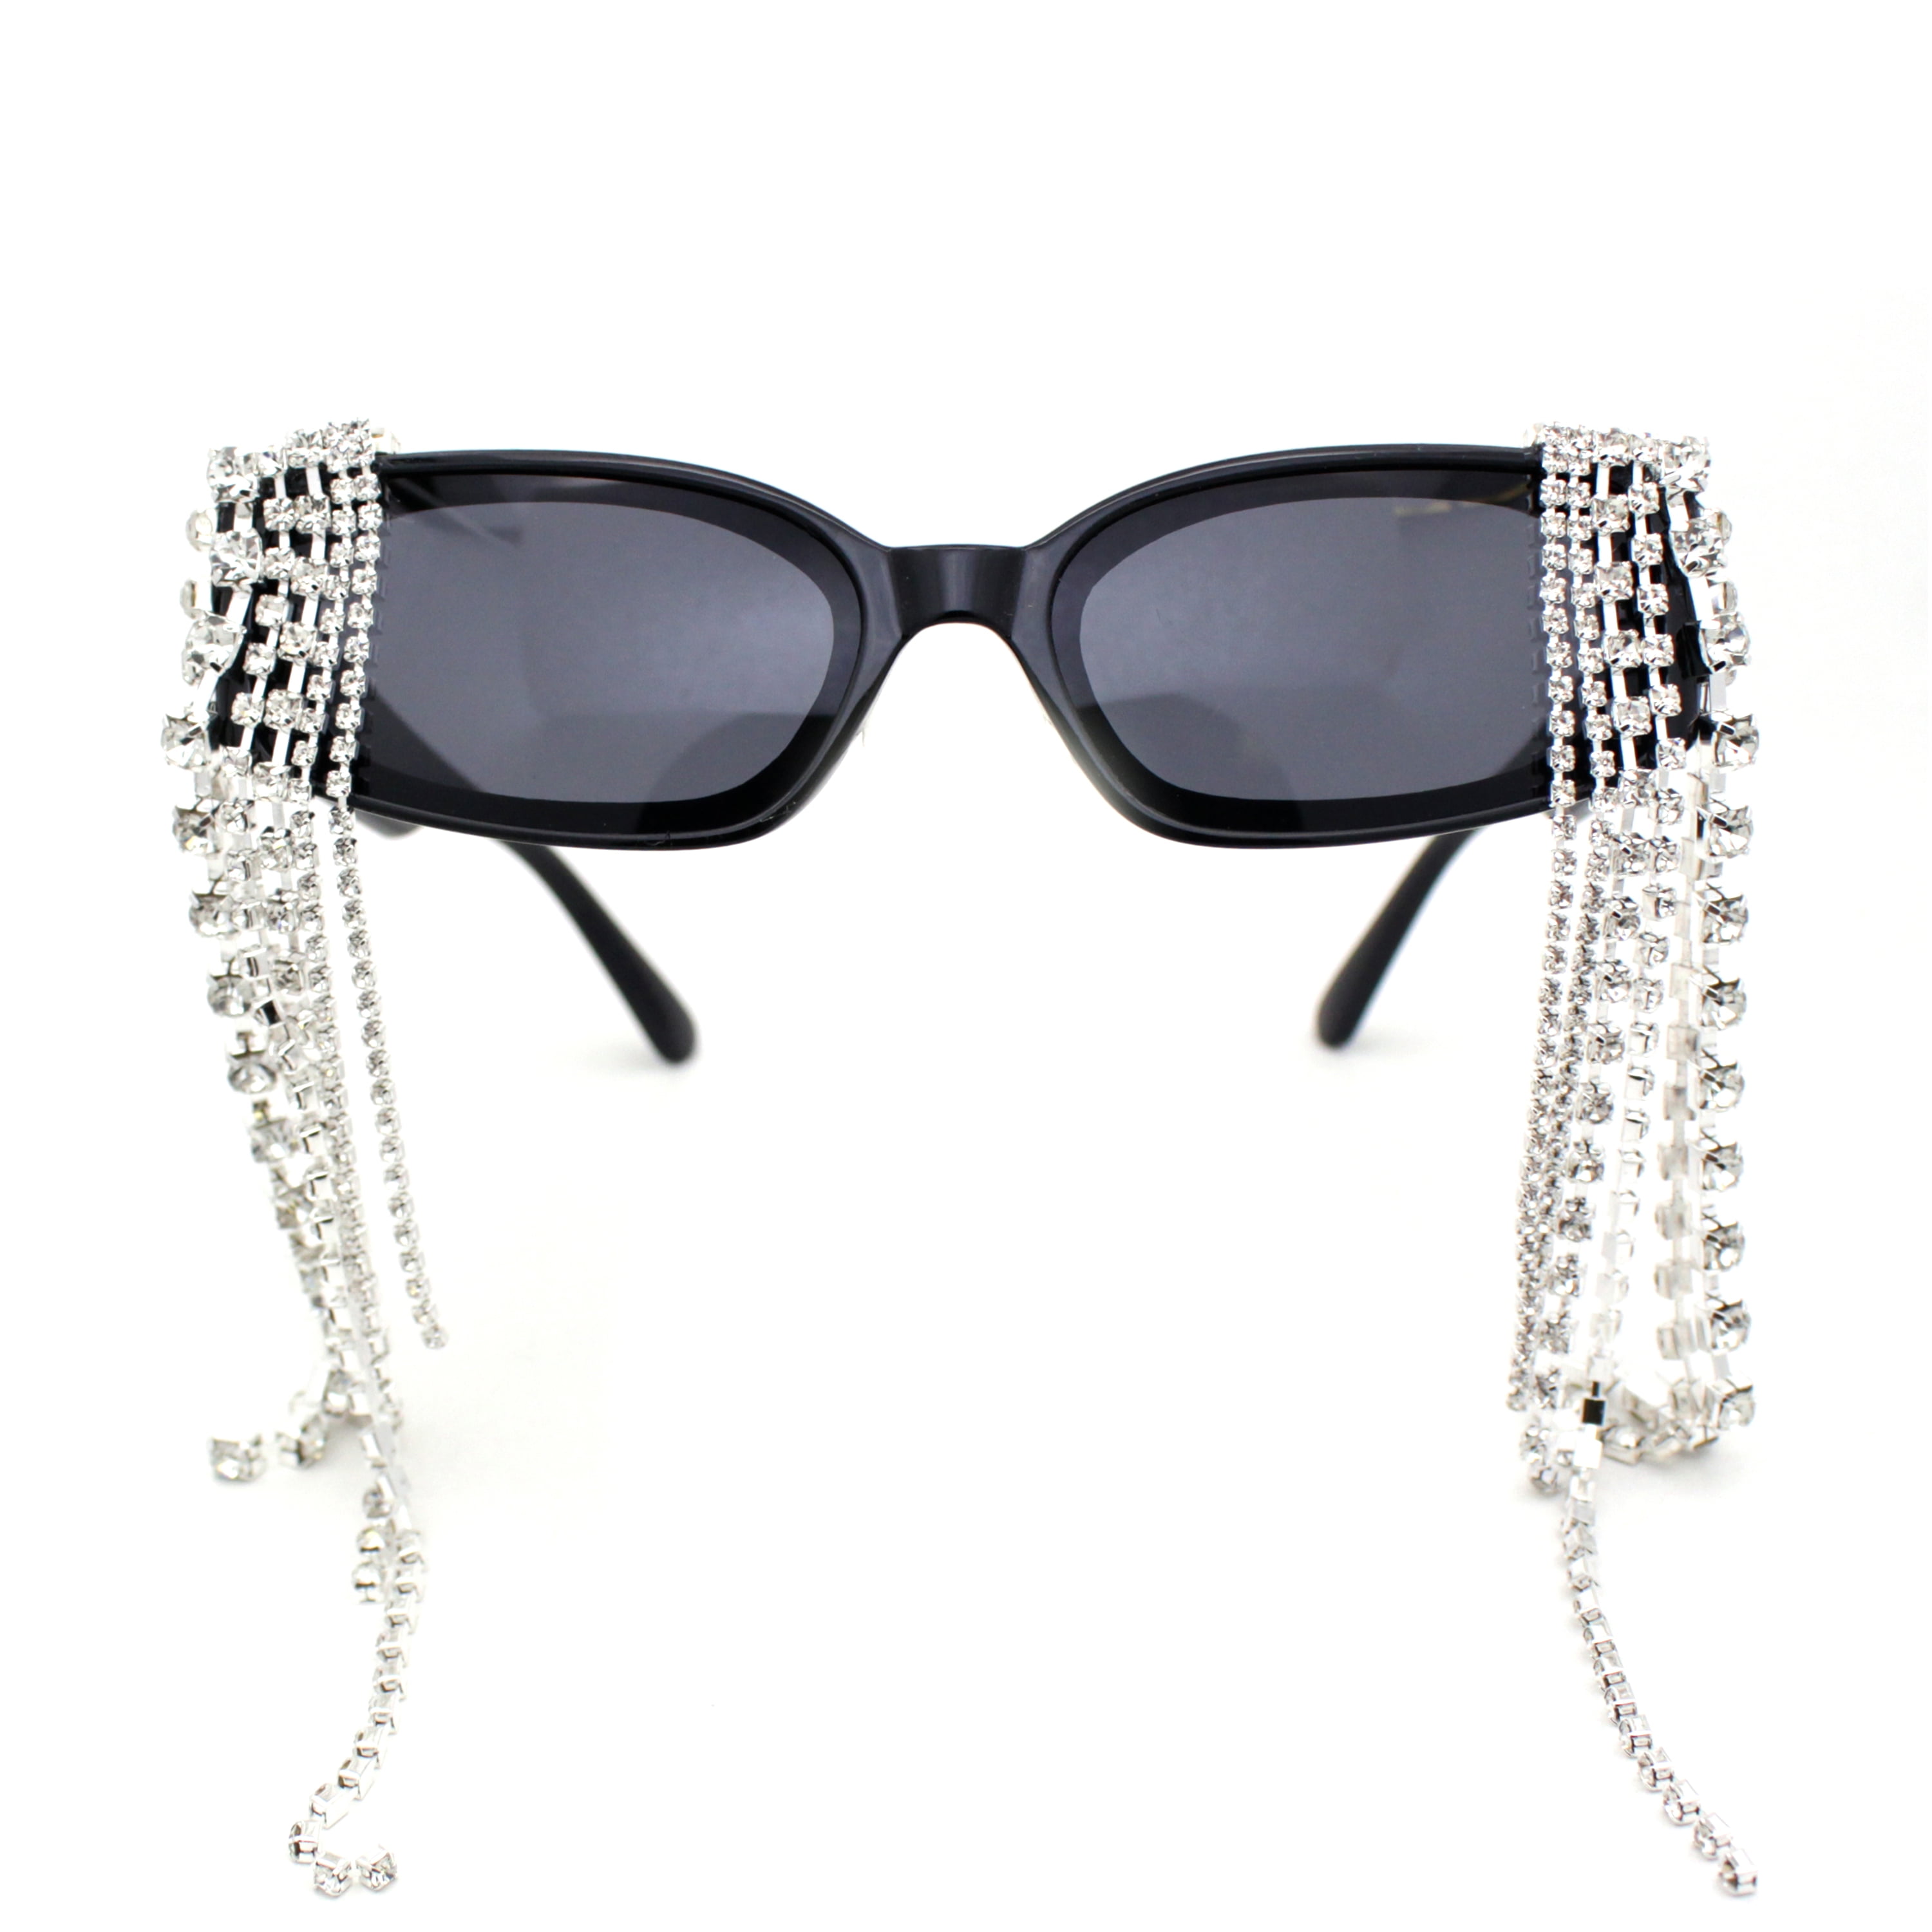 CHANEL Sunglasses With Beautiful Frame Black Overflowing in 